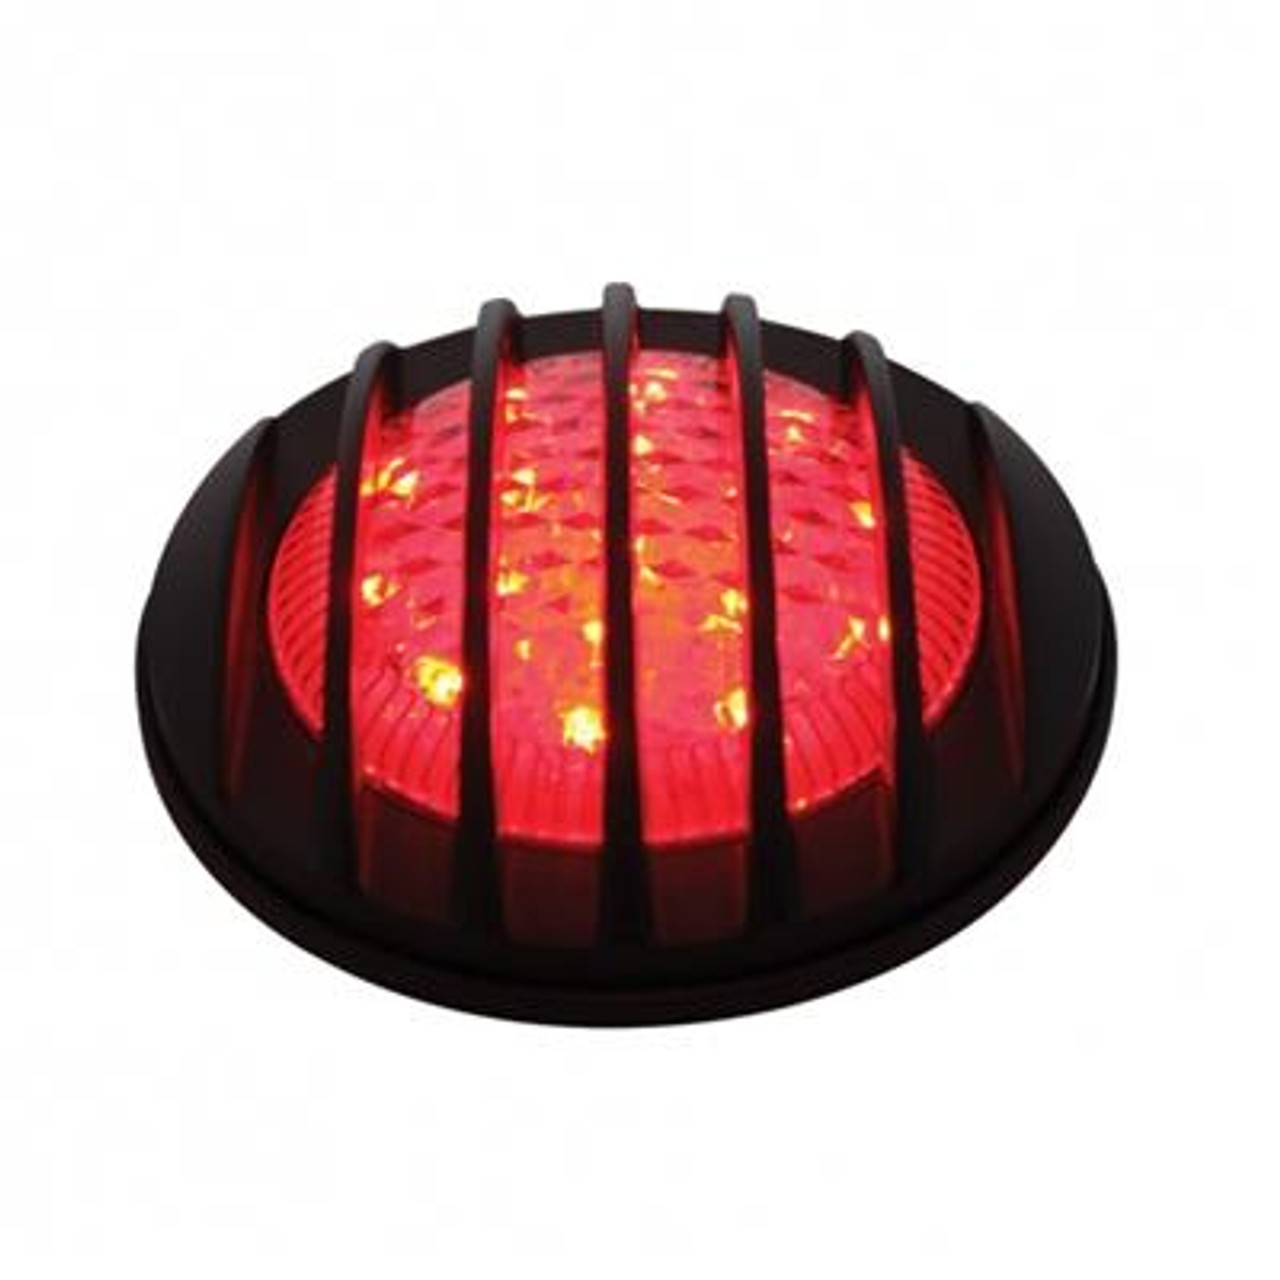 17 LED Tail Light With Black Grille Style Flush Mount